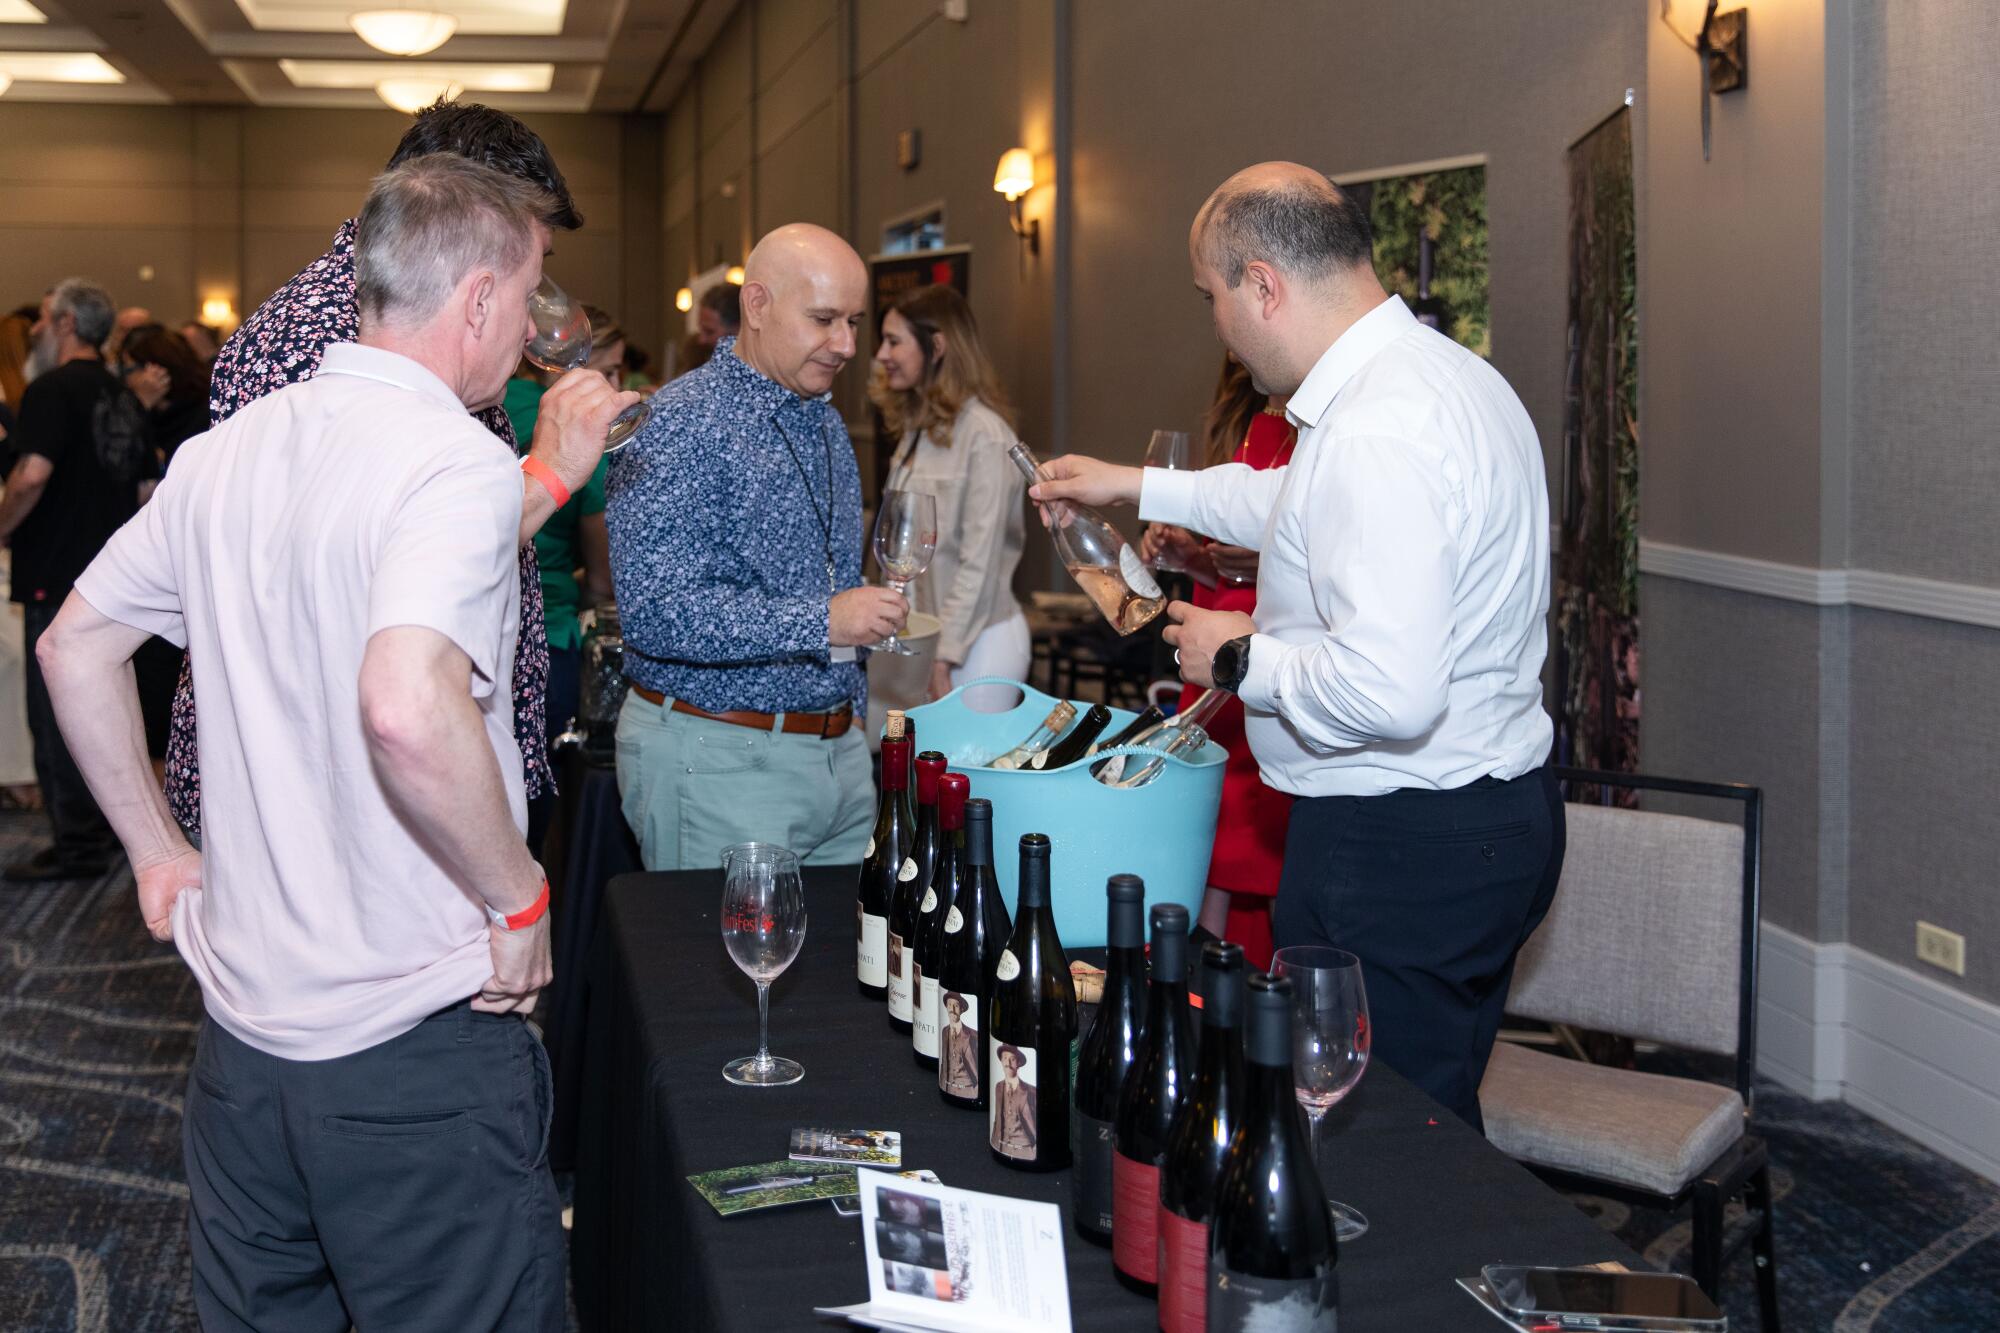 Several men stand examining wine bottles and tasting wine.